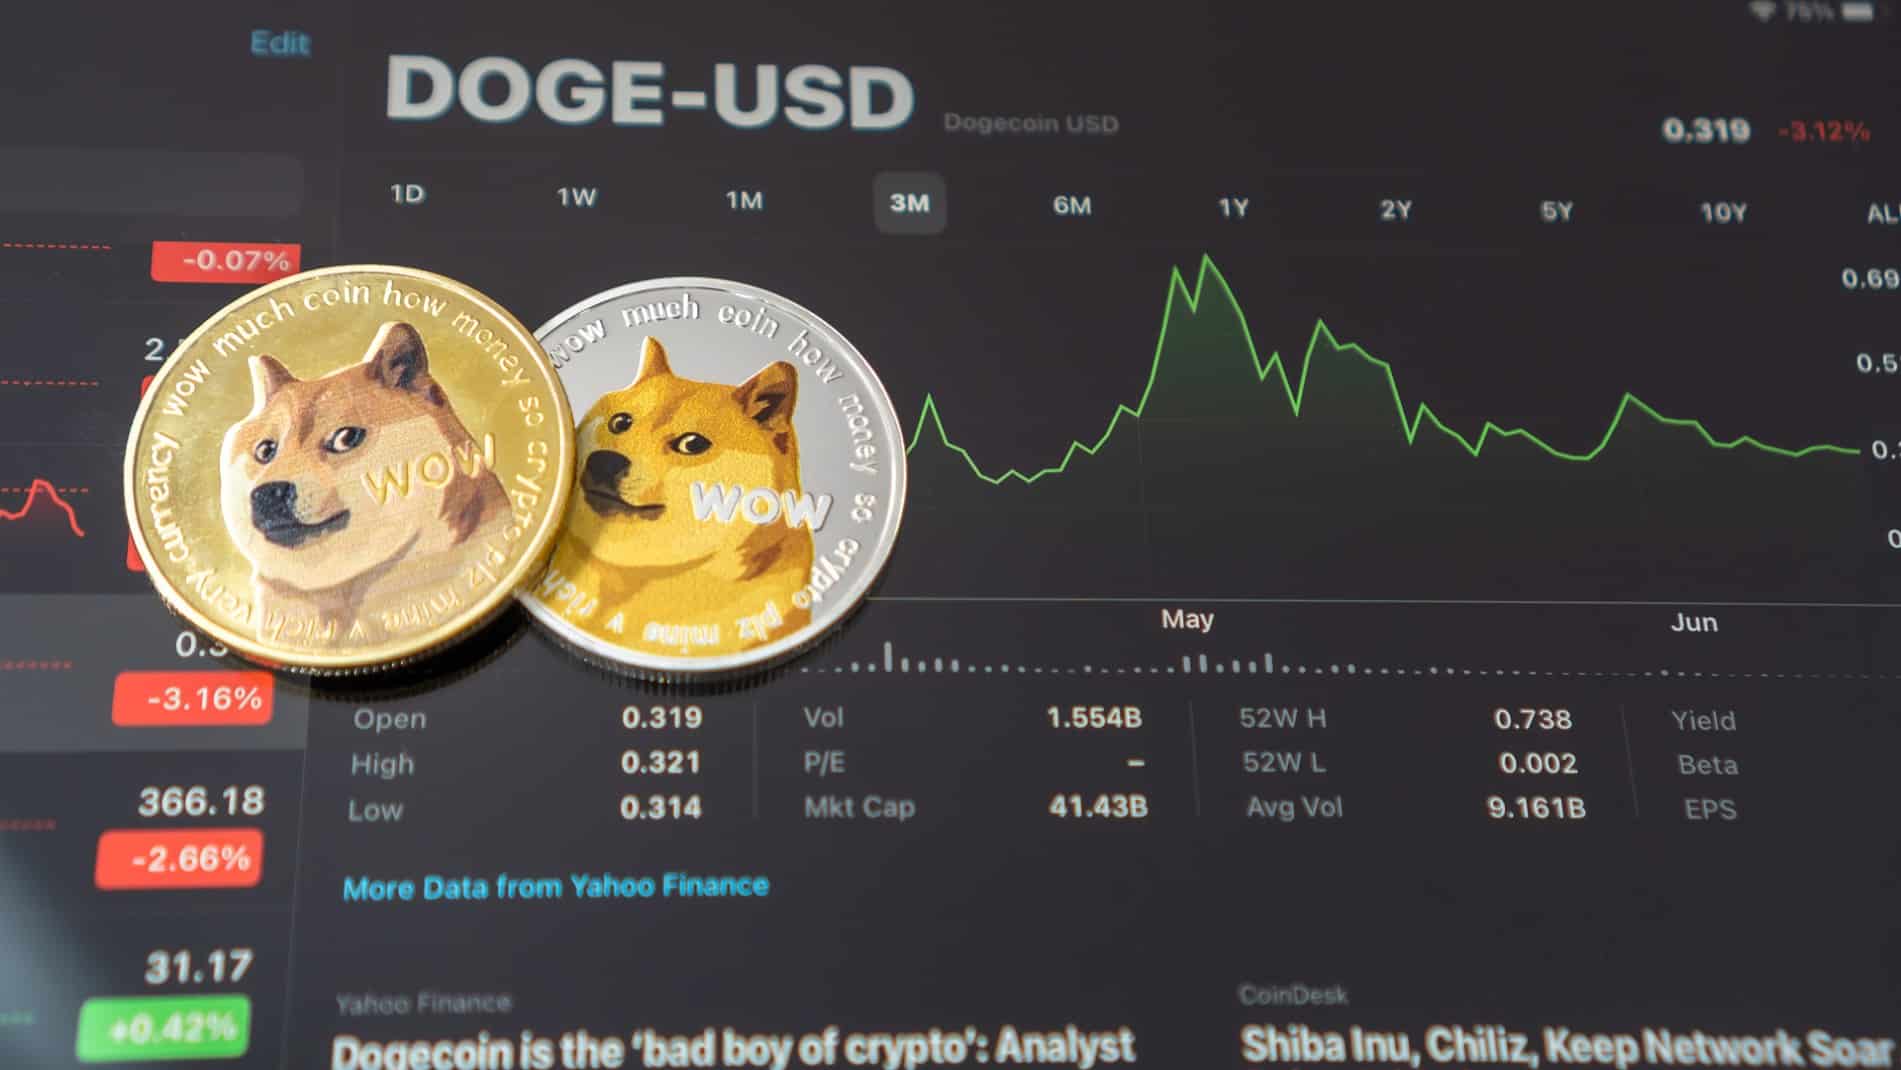 Are Dogecoin expecting significant changes?  Co-founder Billy Markus is clear on this